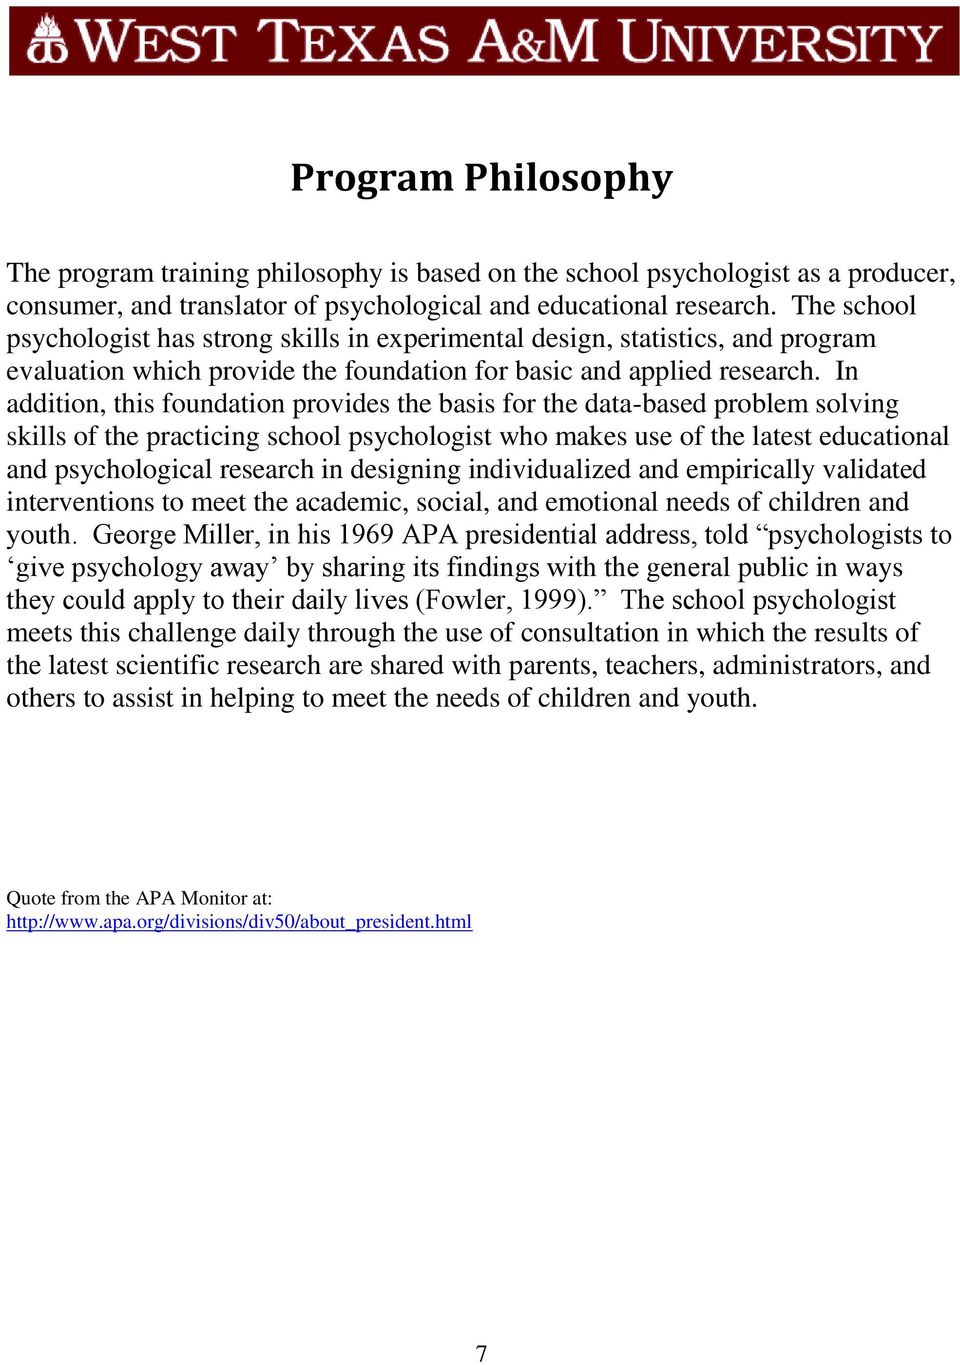 In addition, this foundation provides the basis for the data-based problem solving skills of the practicing school psychologist who makes use of the latest educational and psychological research in